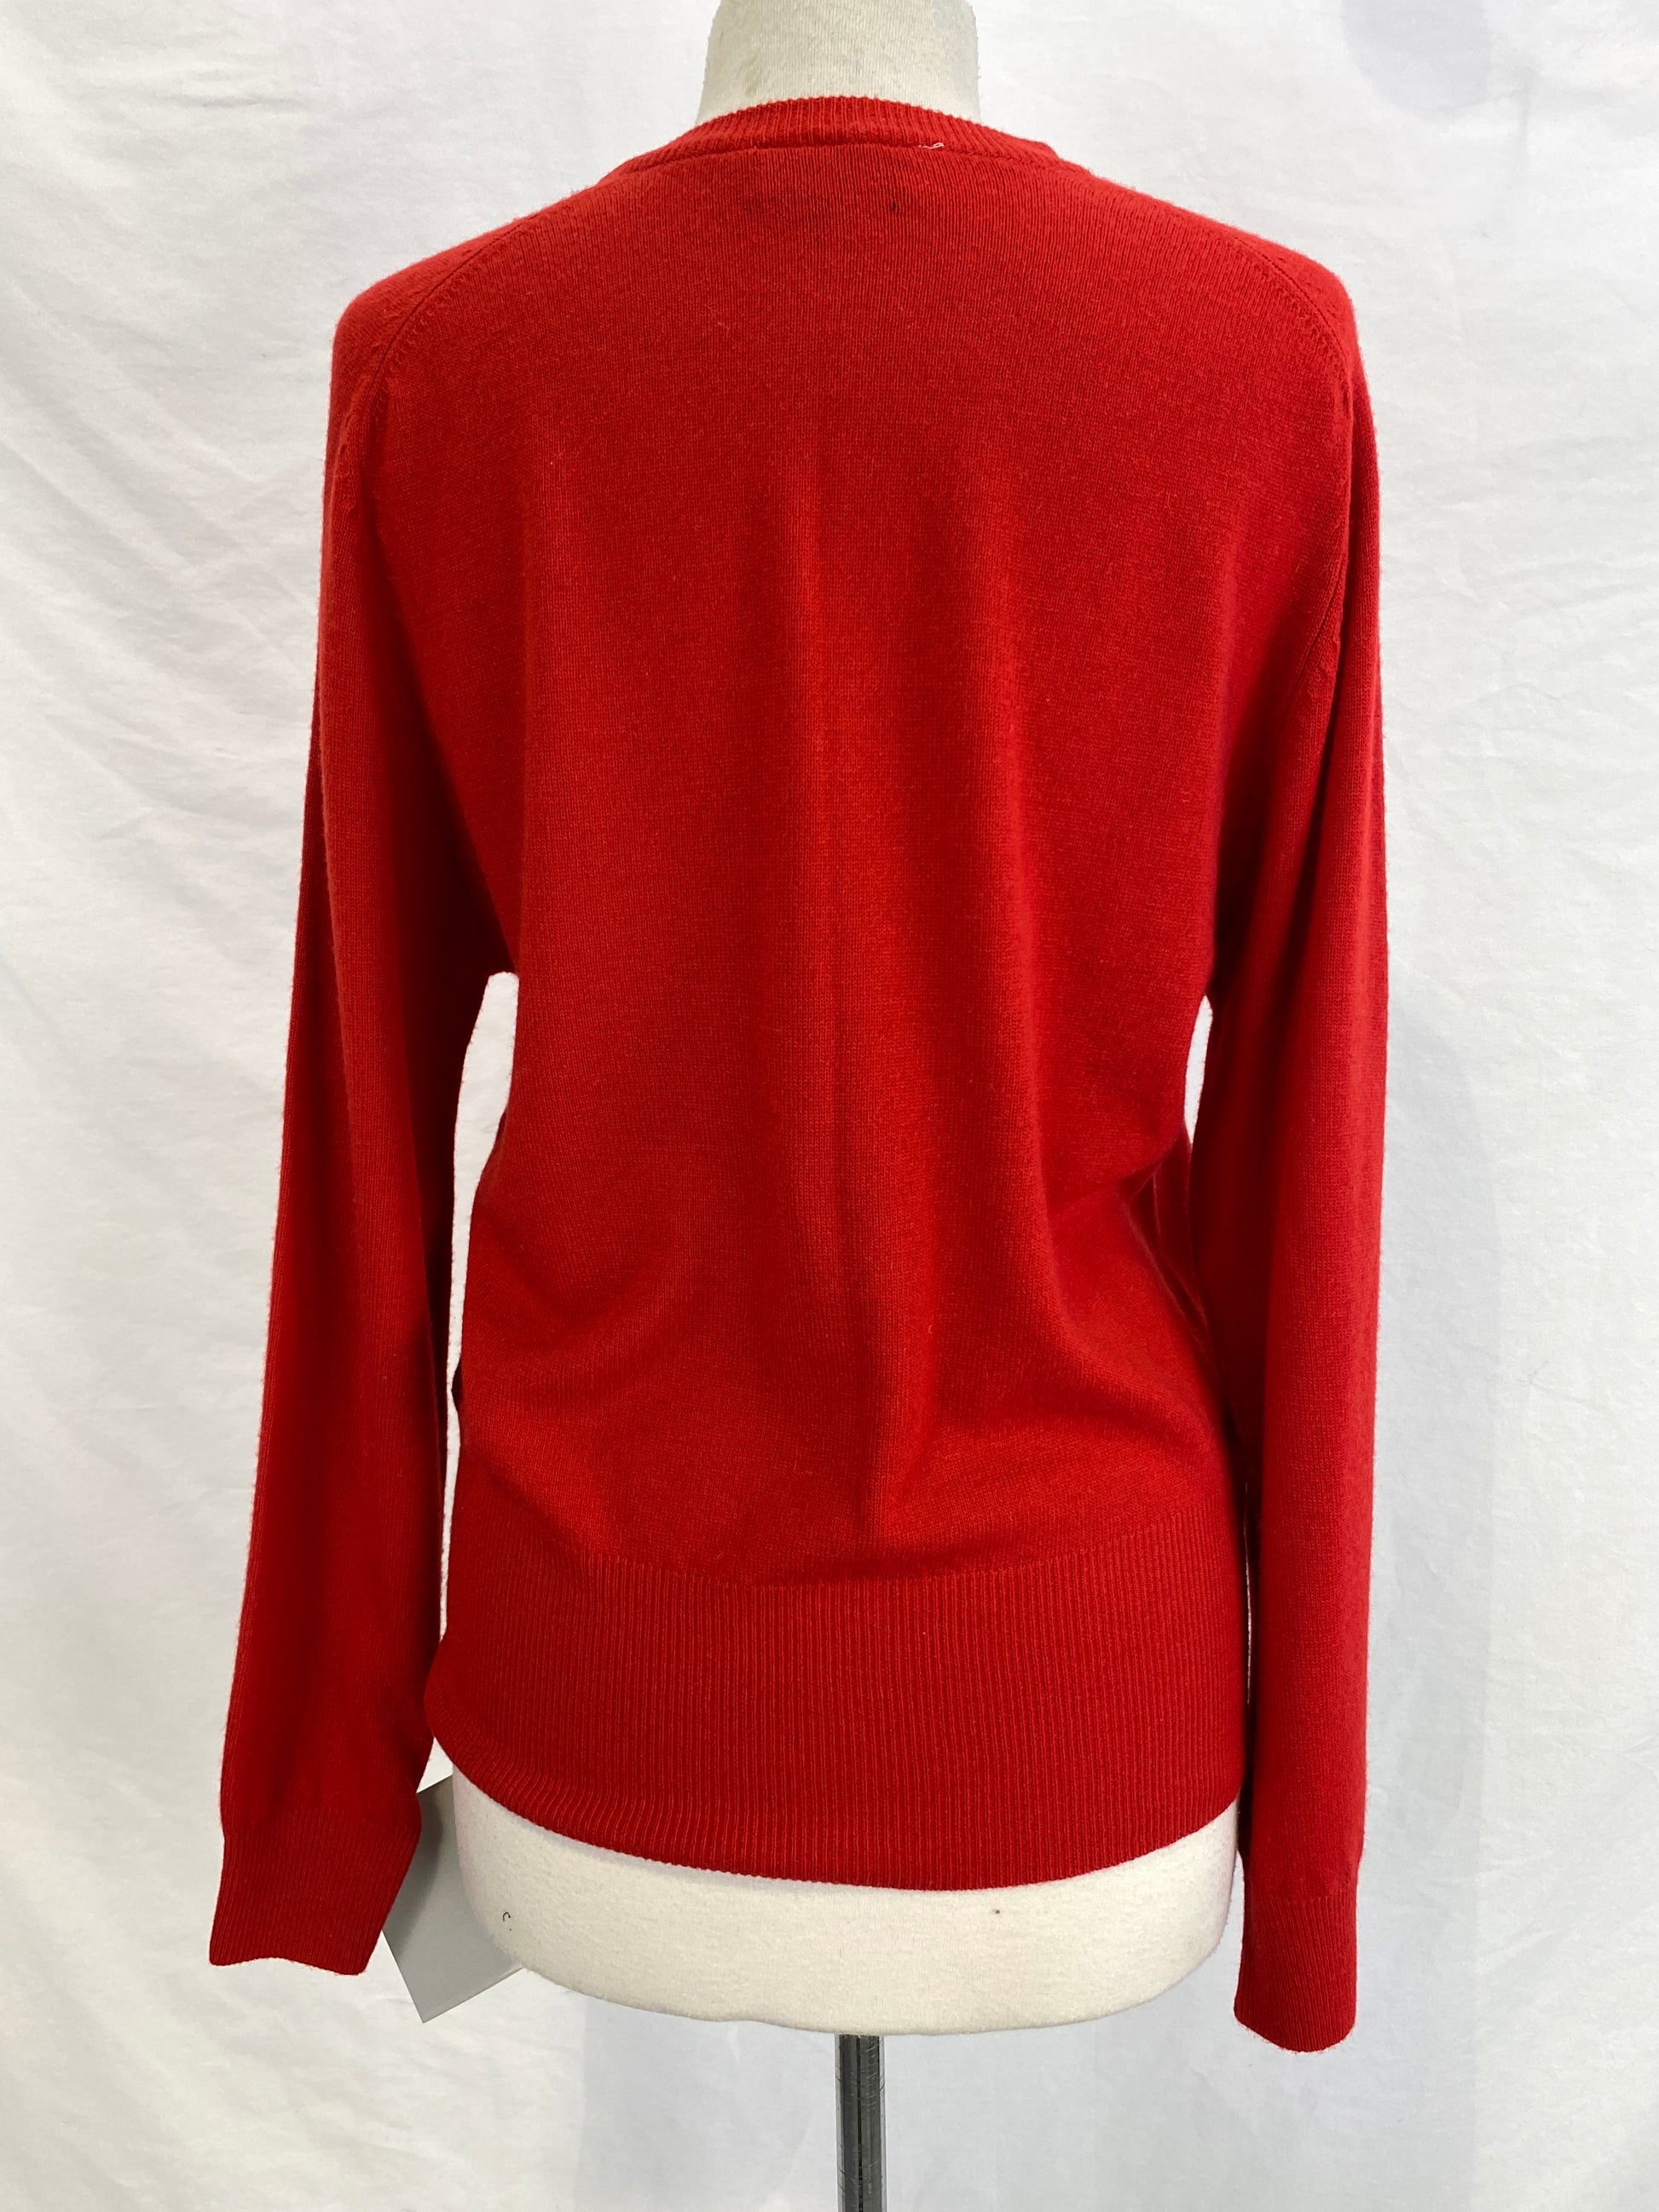 Back of red cashmere cardigan. Ian Drummond Vintage. 